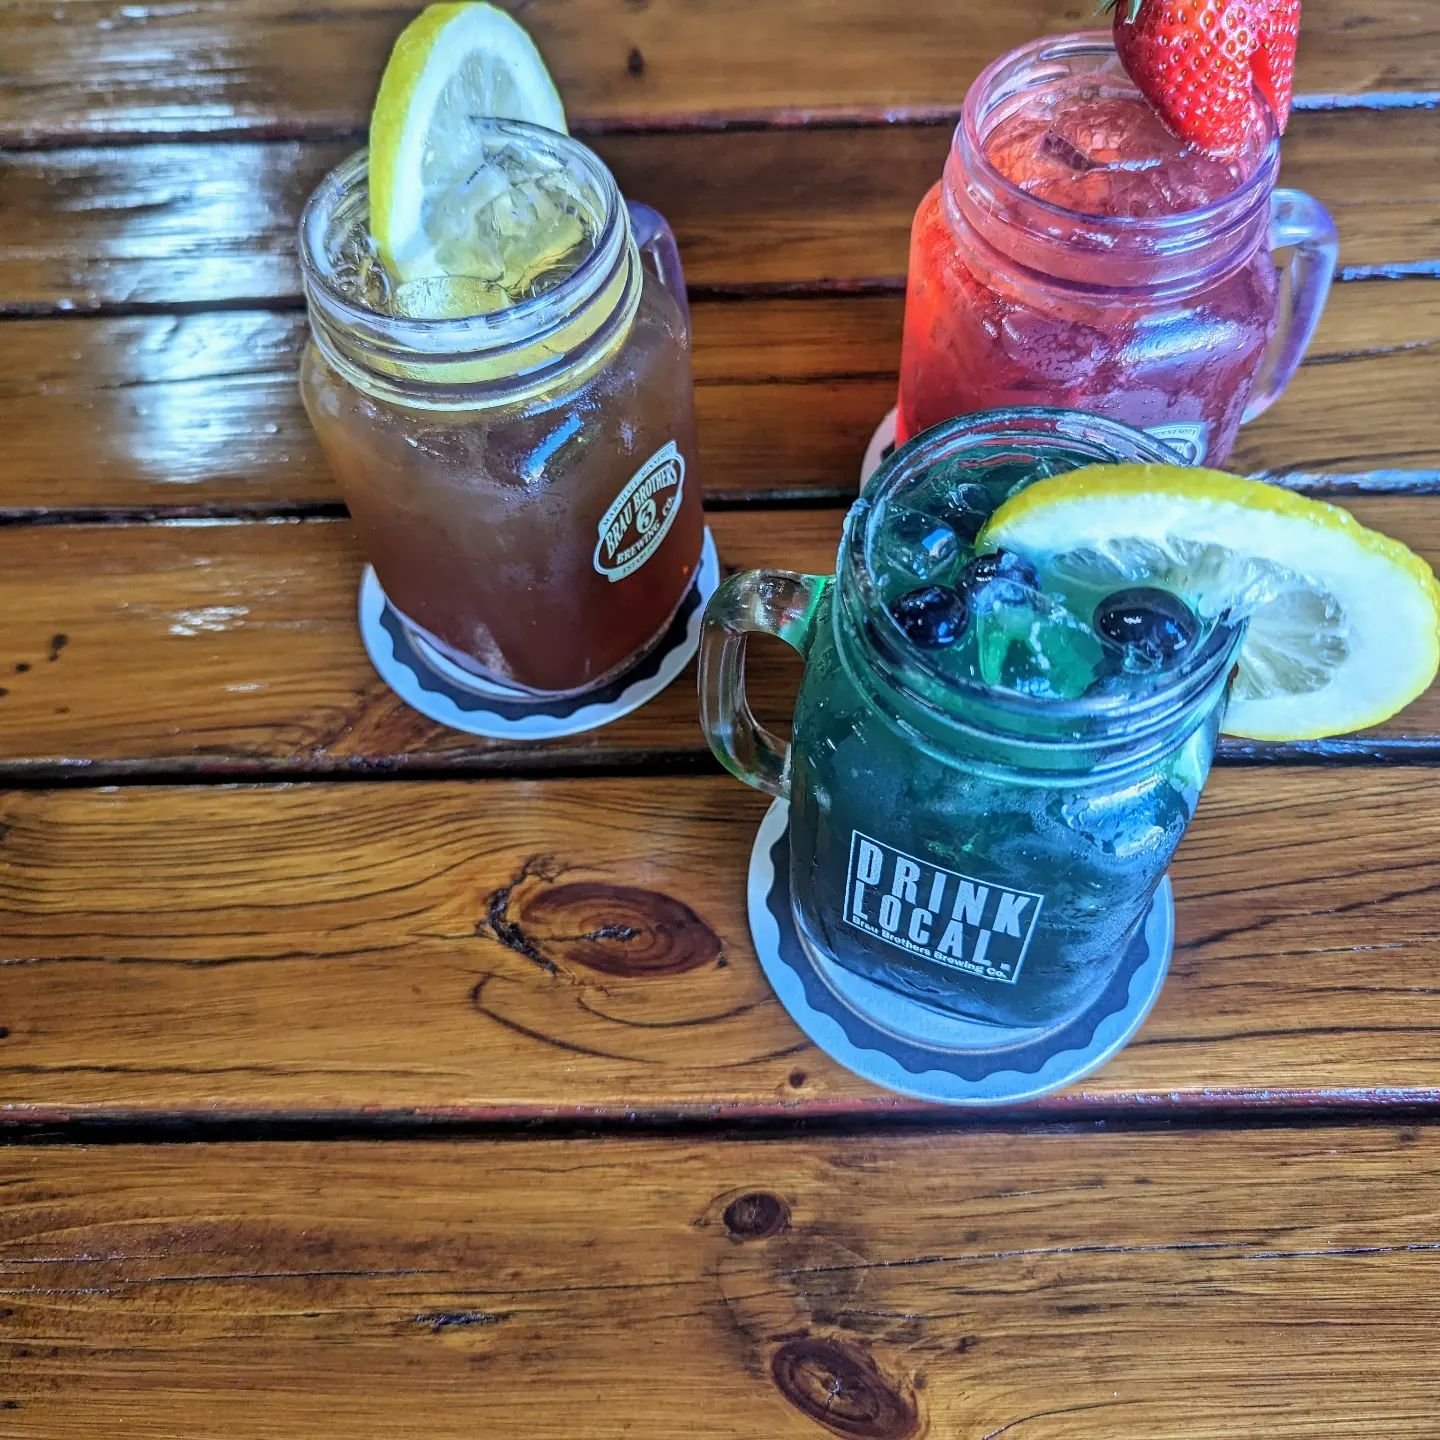 Tipsy Teas are back in the taproom! ☀️

🫐 Blueberry Lemon
🍓 Strawberry Basil
🍋 Arnold Palmer

Teas are made with our Marshall Water Hard Seltzer &amp; they are delicious.